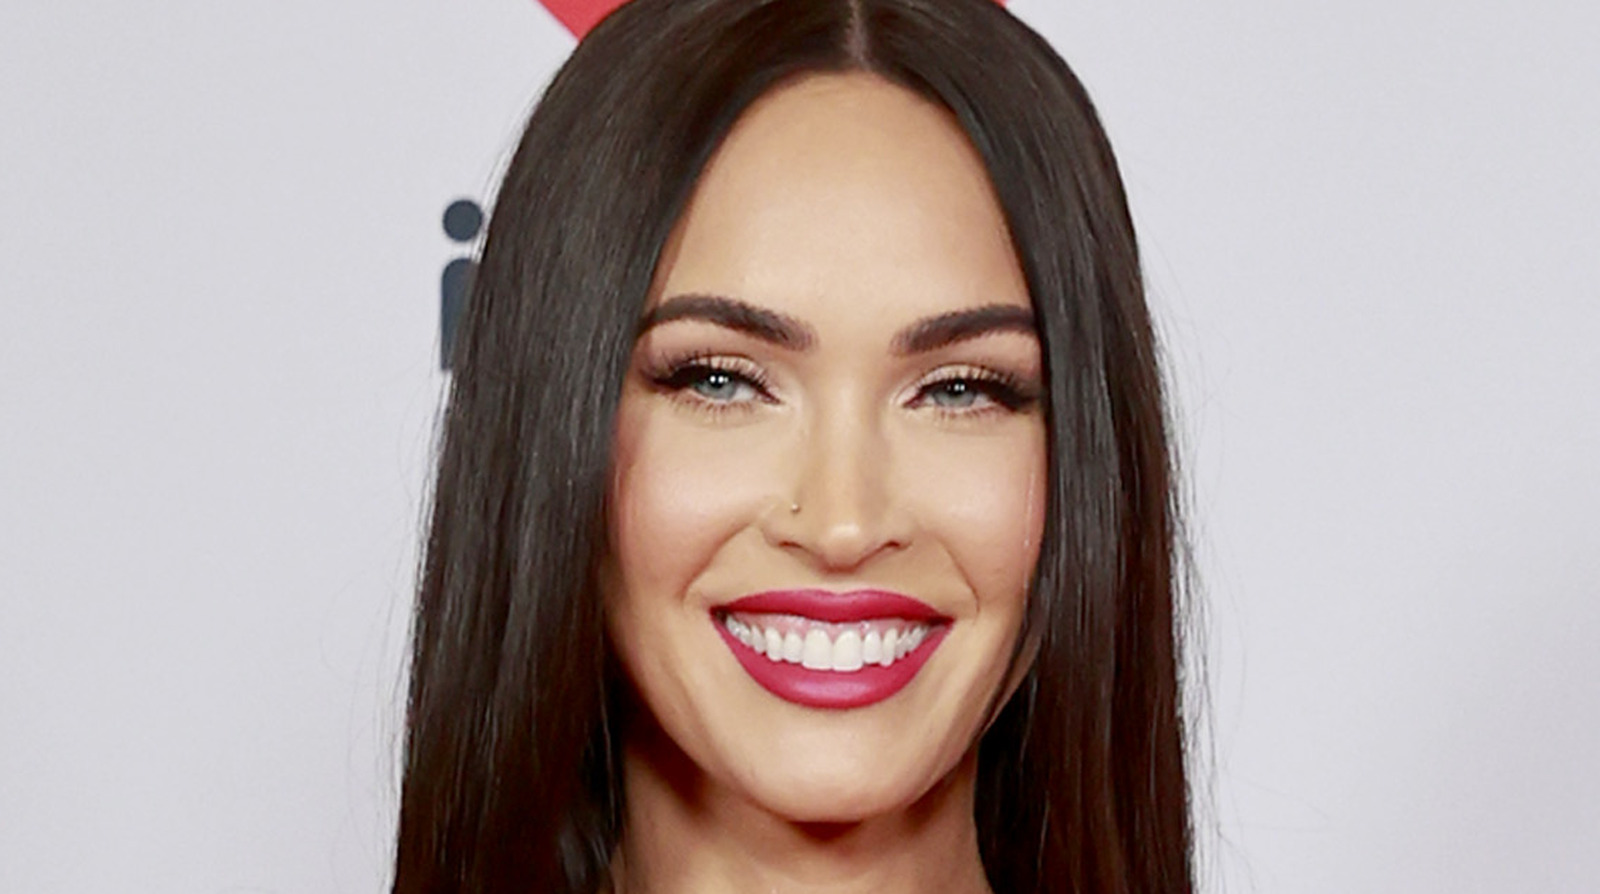 The Transformation Of Megan Fox From 15 To 35 Years Old